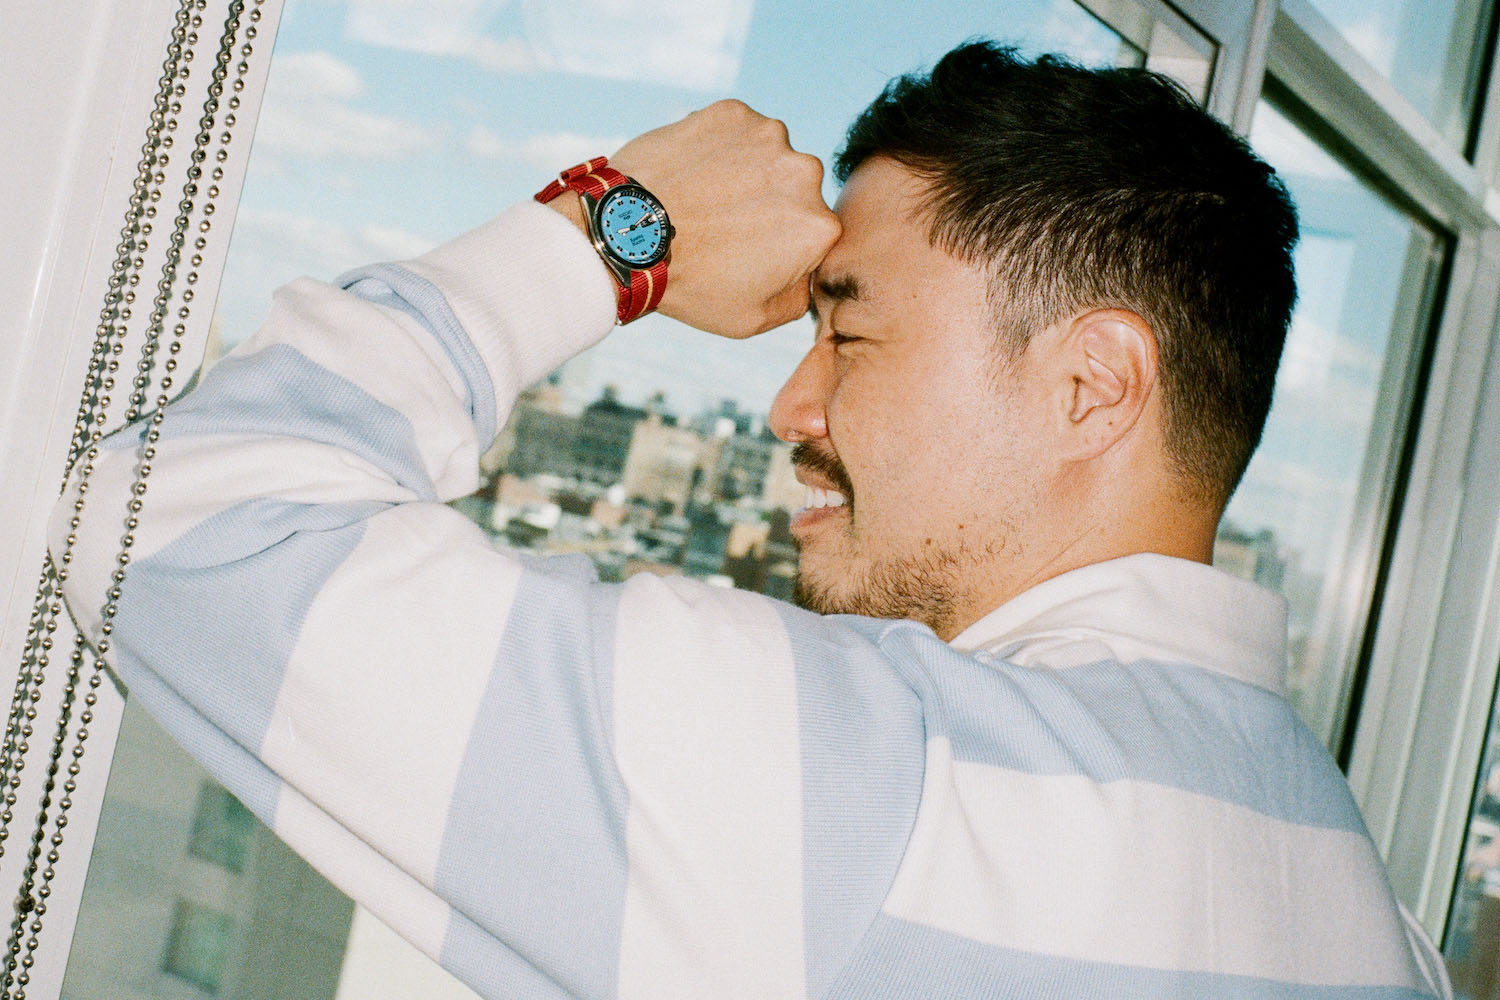 Actor Randall Park wearing the Rowing Blazers x Seiko watch standing against a window